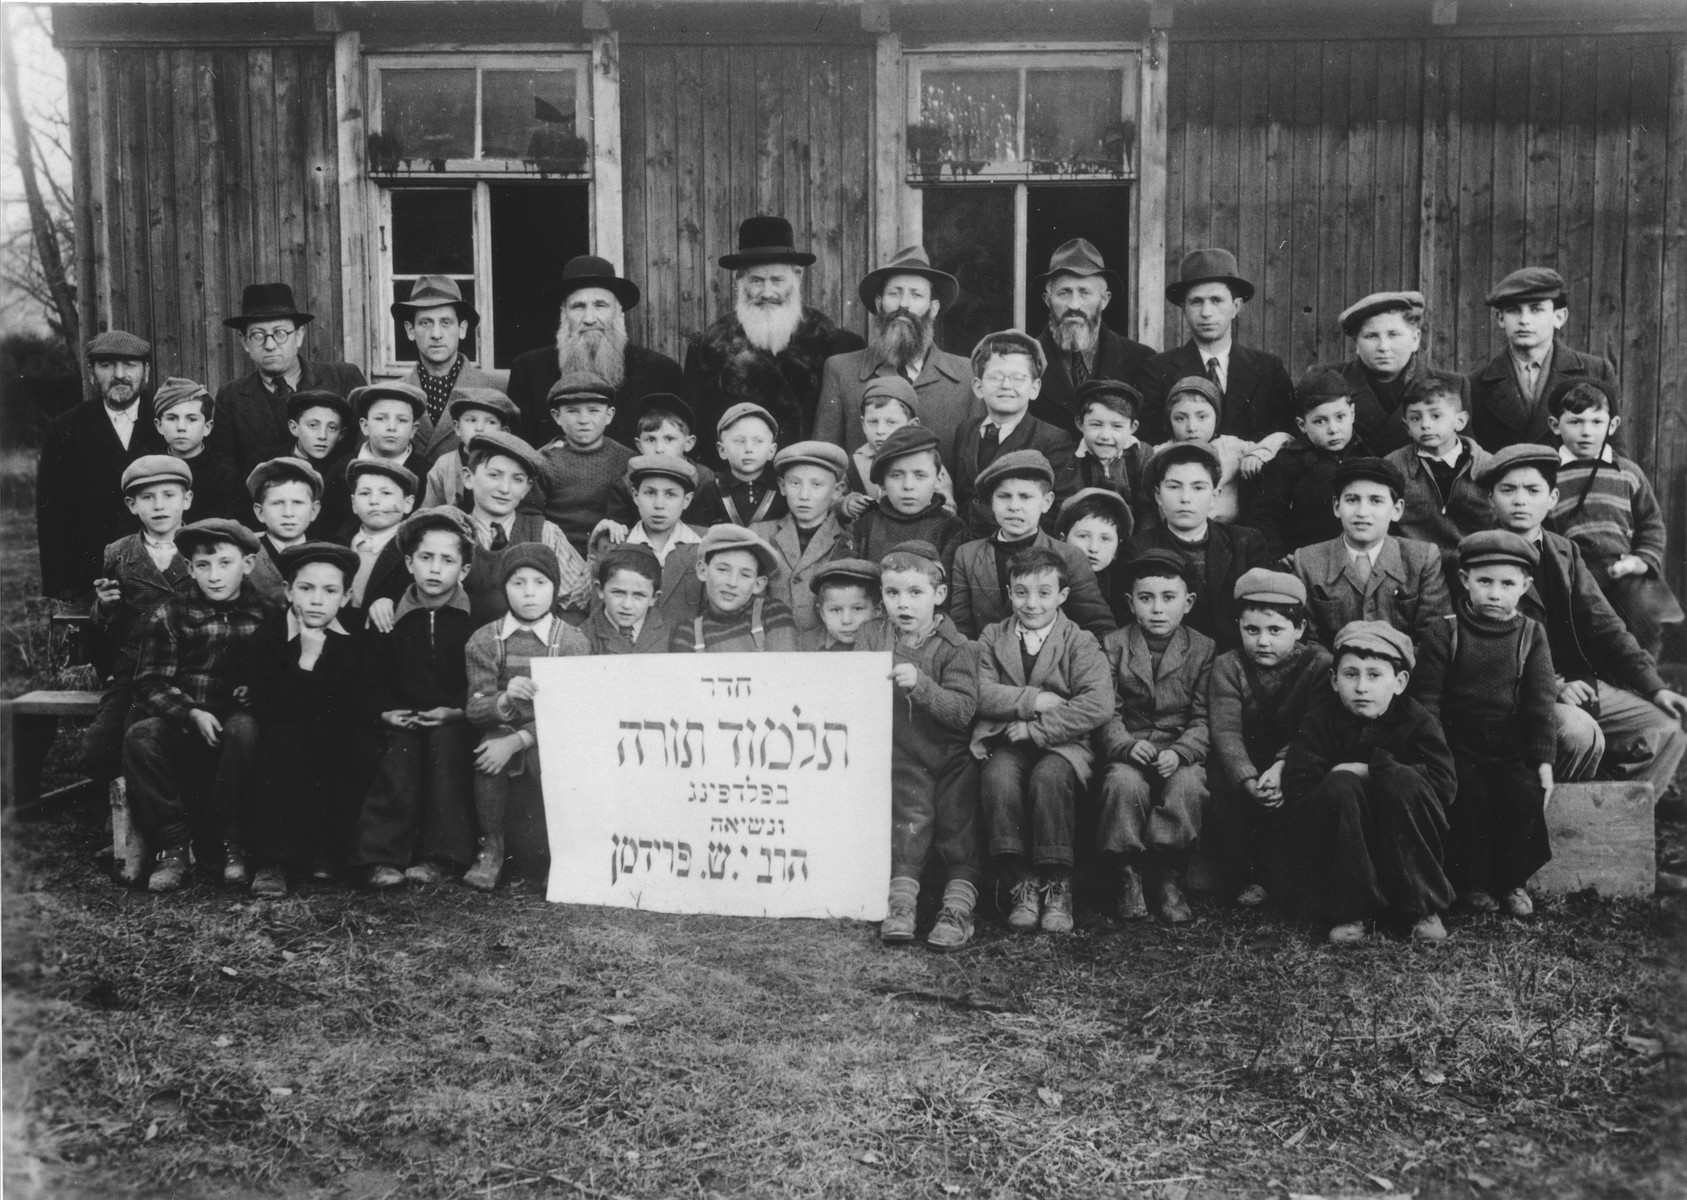 Group portrait of students and teachers of the Talmud Torah (religious primary school) in the Feldafing displaced persons camp.

Among those pictured is Srulek Rajs. Pictured in the second row, fourth from the right is Manny Mendel Glass